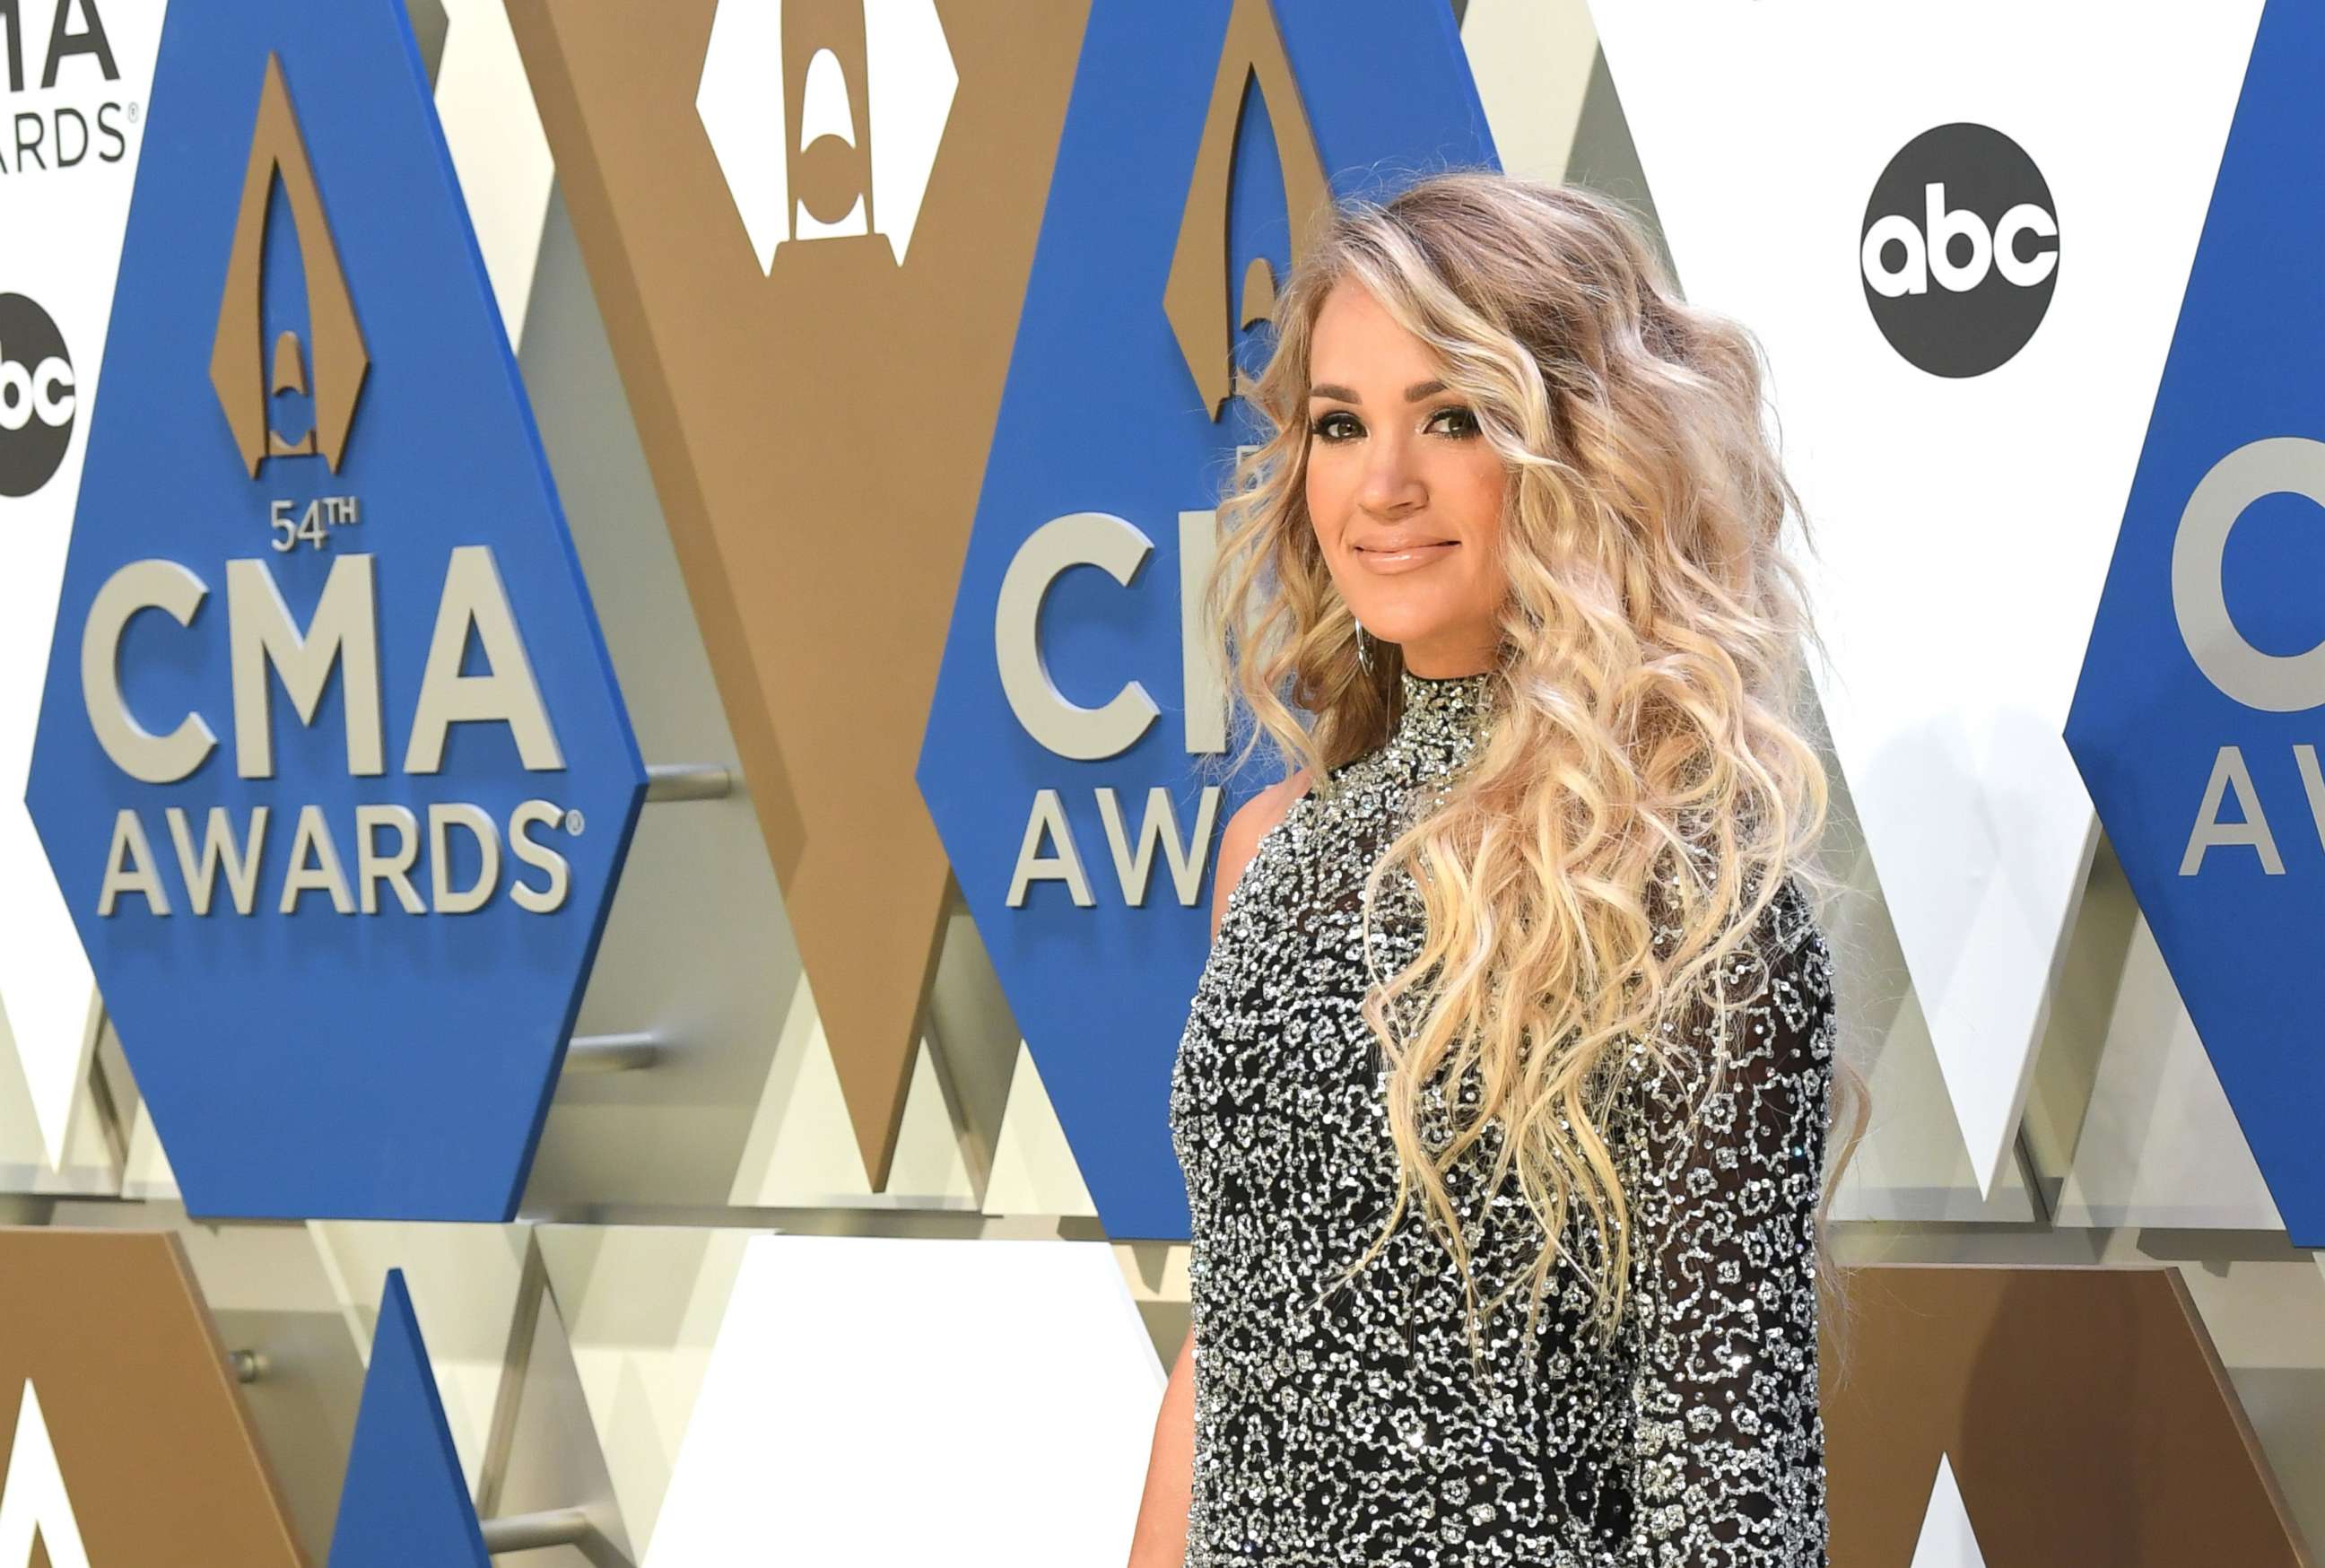 PHOTO: Country artist Carrie Underwood attends the 54th annual CMA Awards at the Music City Center, Nov. 11, 2020, in Nashville.